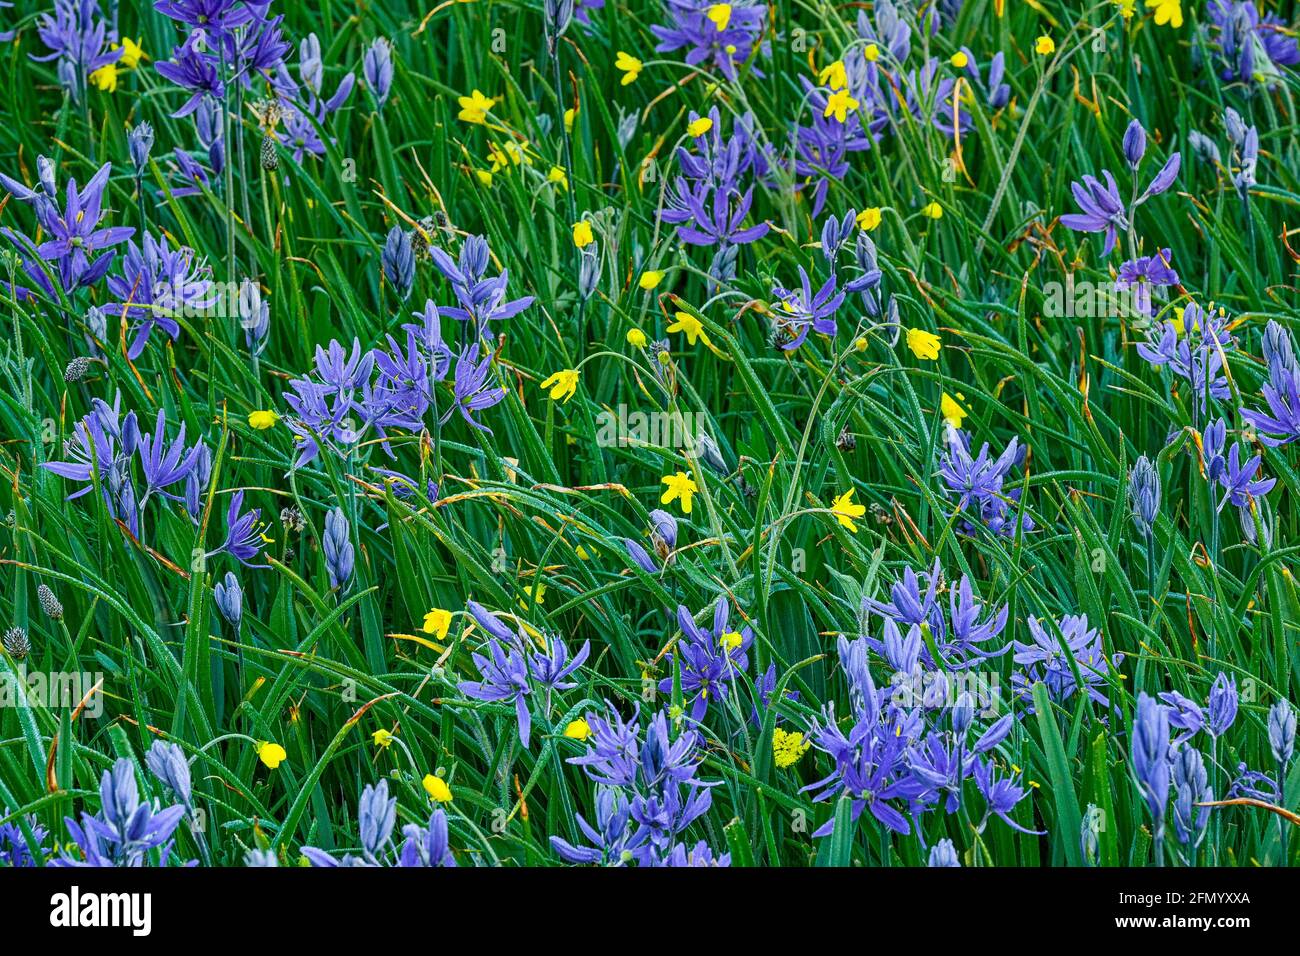 Wildflowers, Camas and buttercup, Uplands Park, Oak Bay, Vancouver Island, British Columbia, Canada Stock Photo